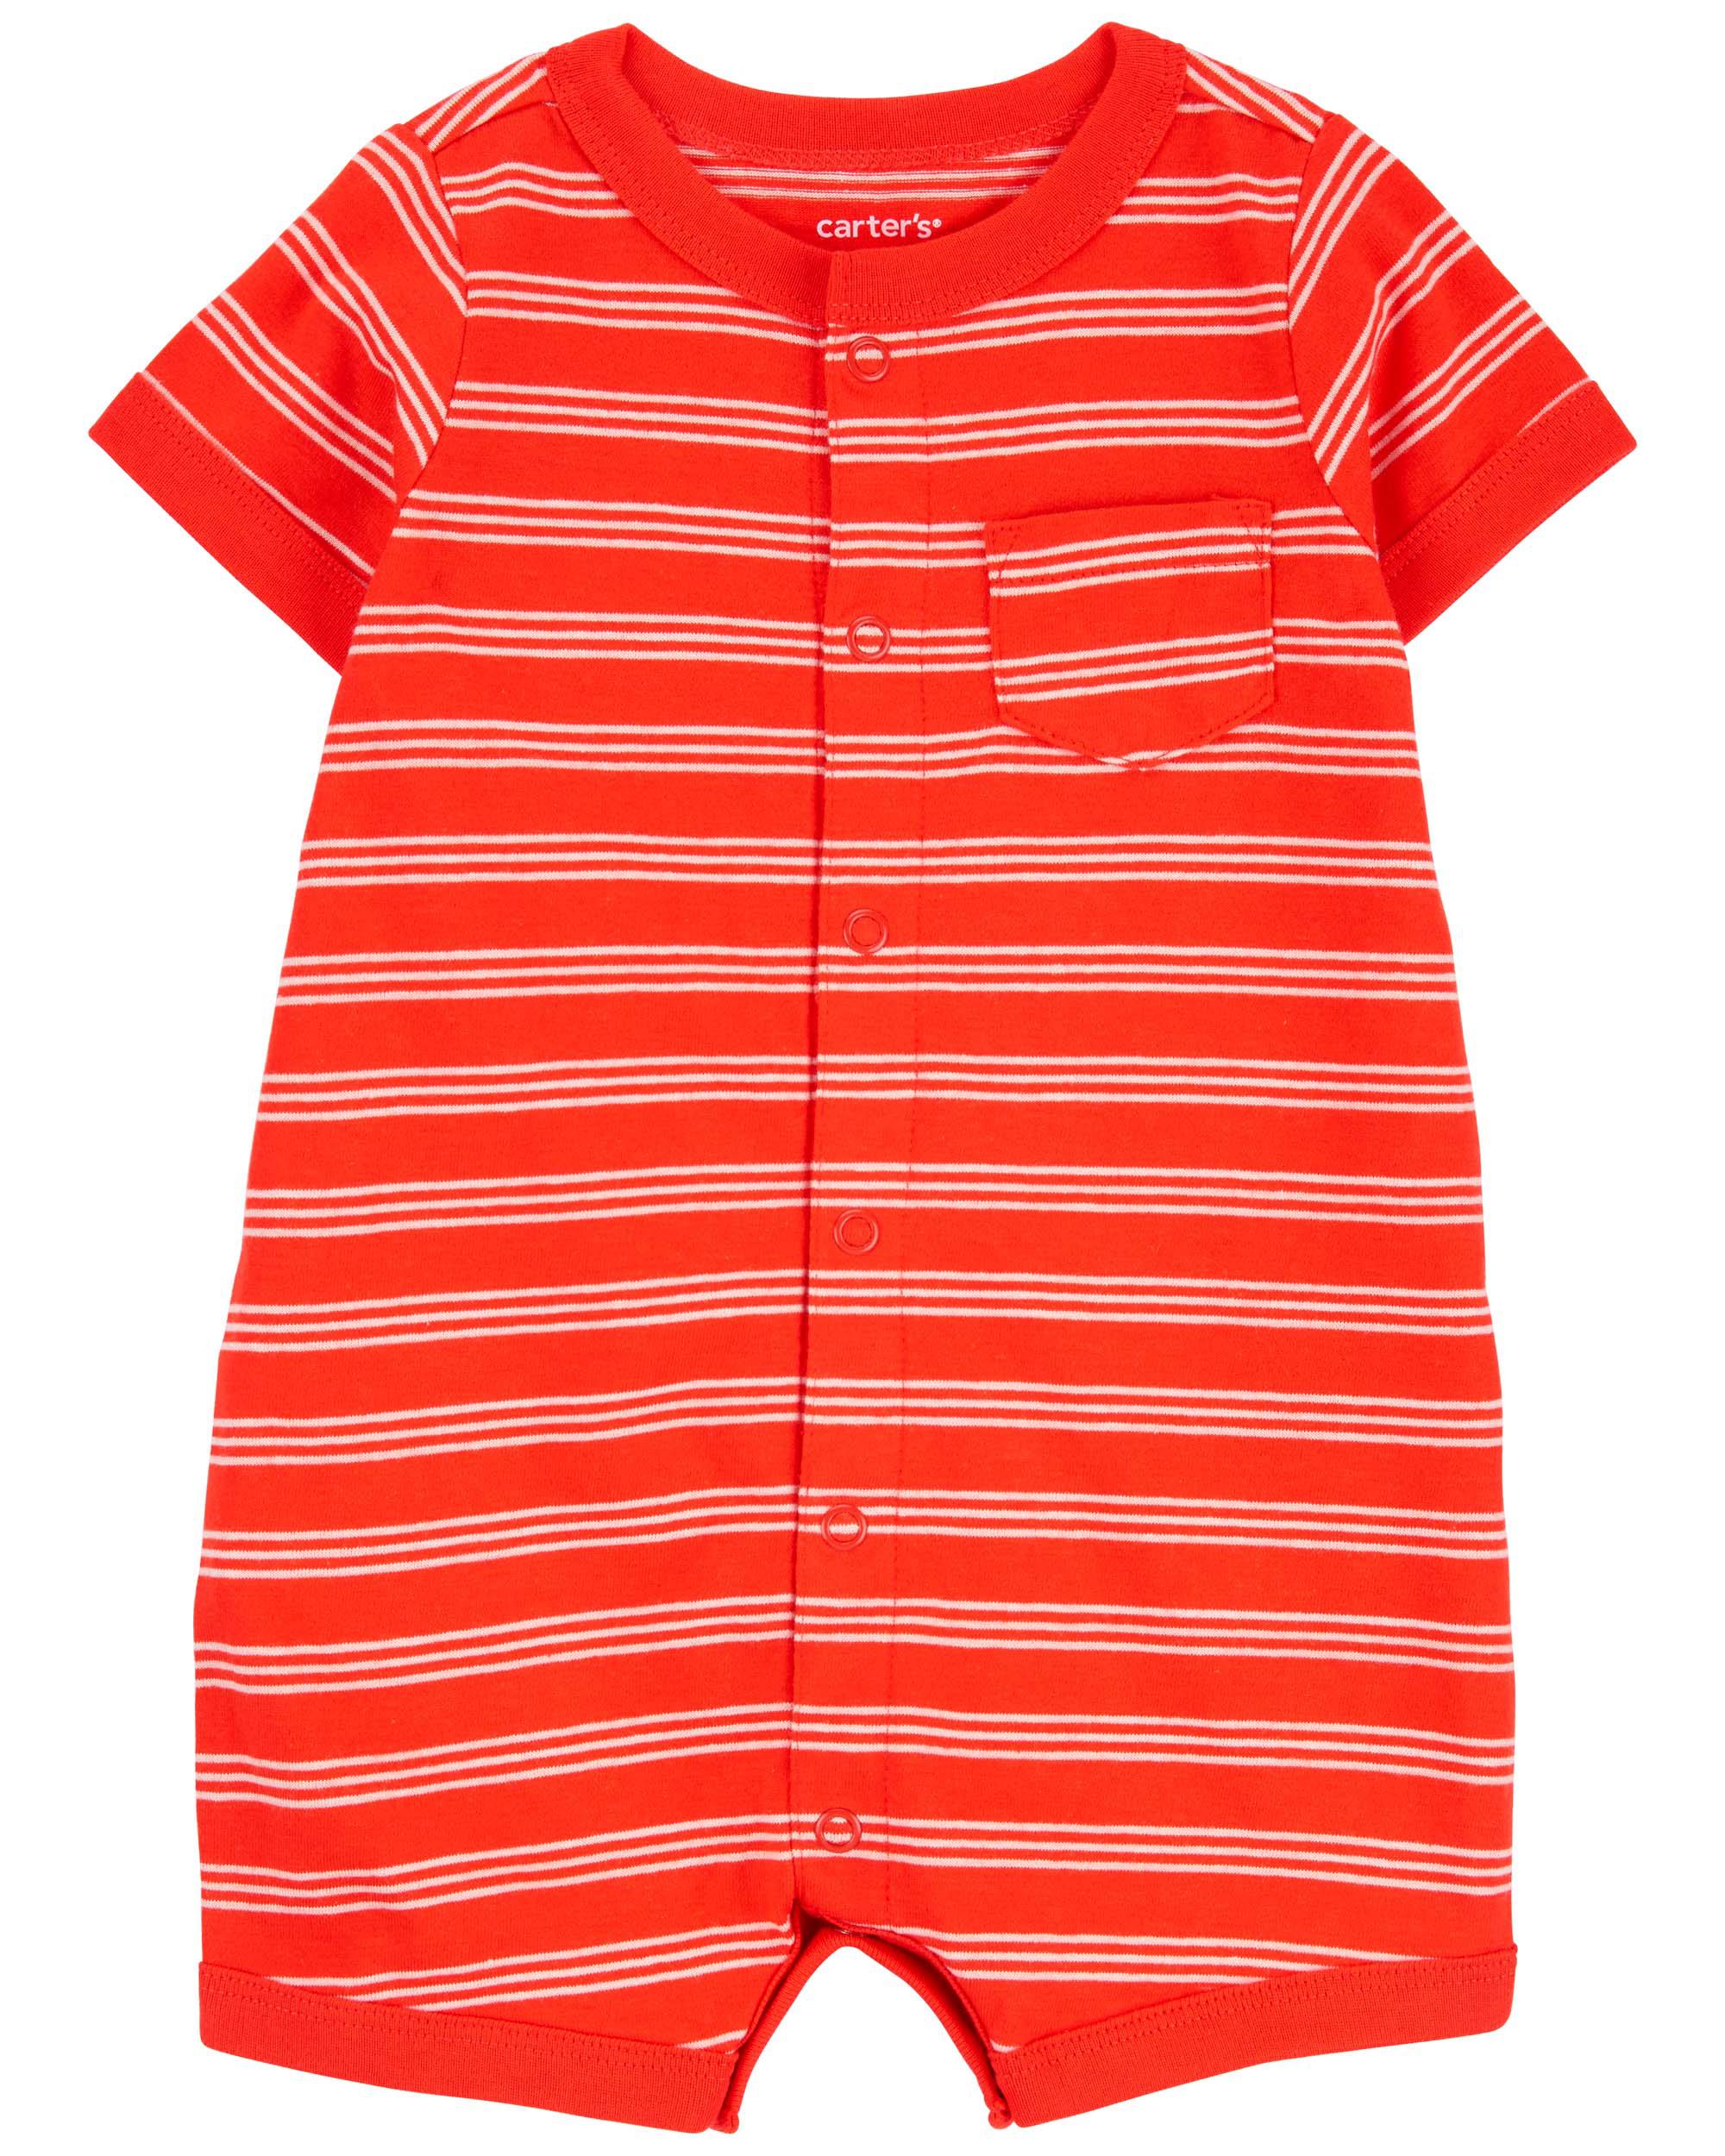 Baby Striped Snap-Up Romper